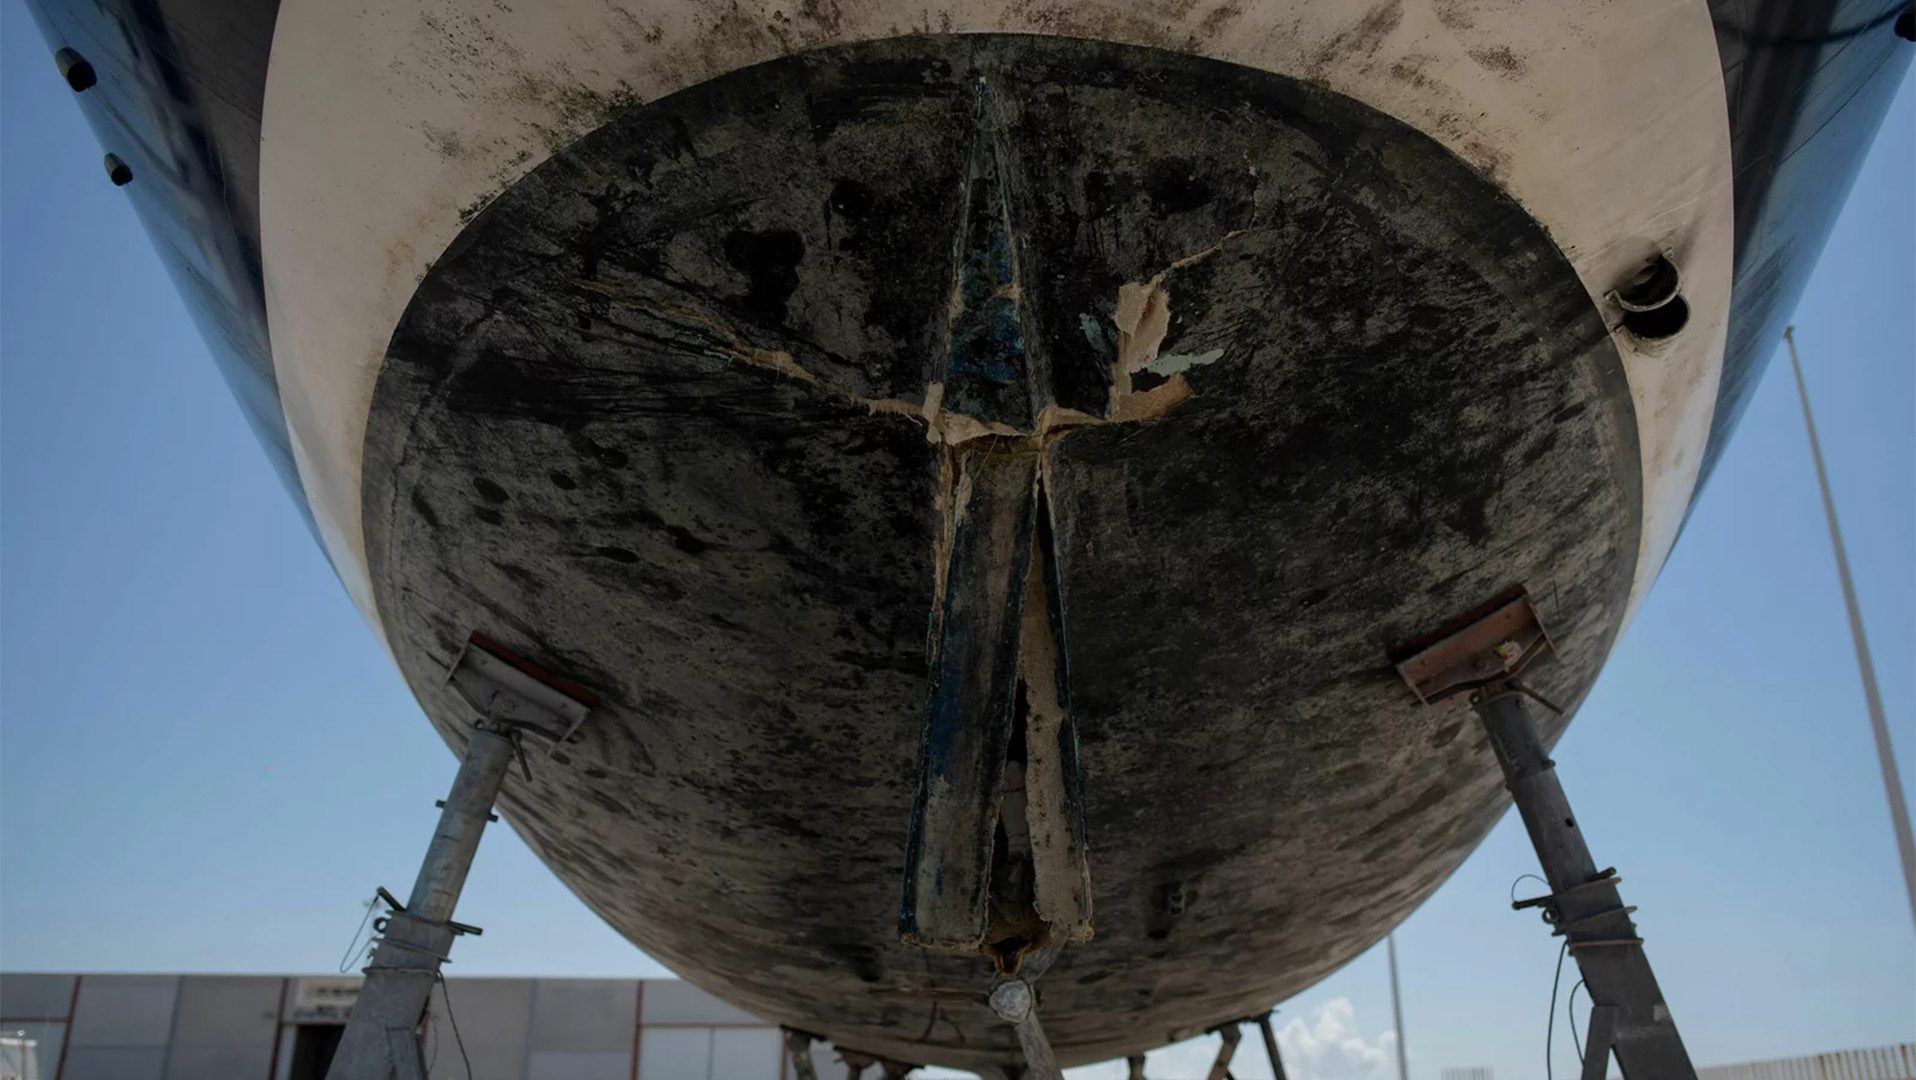 The rudder of a vessel damaged by orcas on May 24